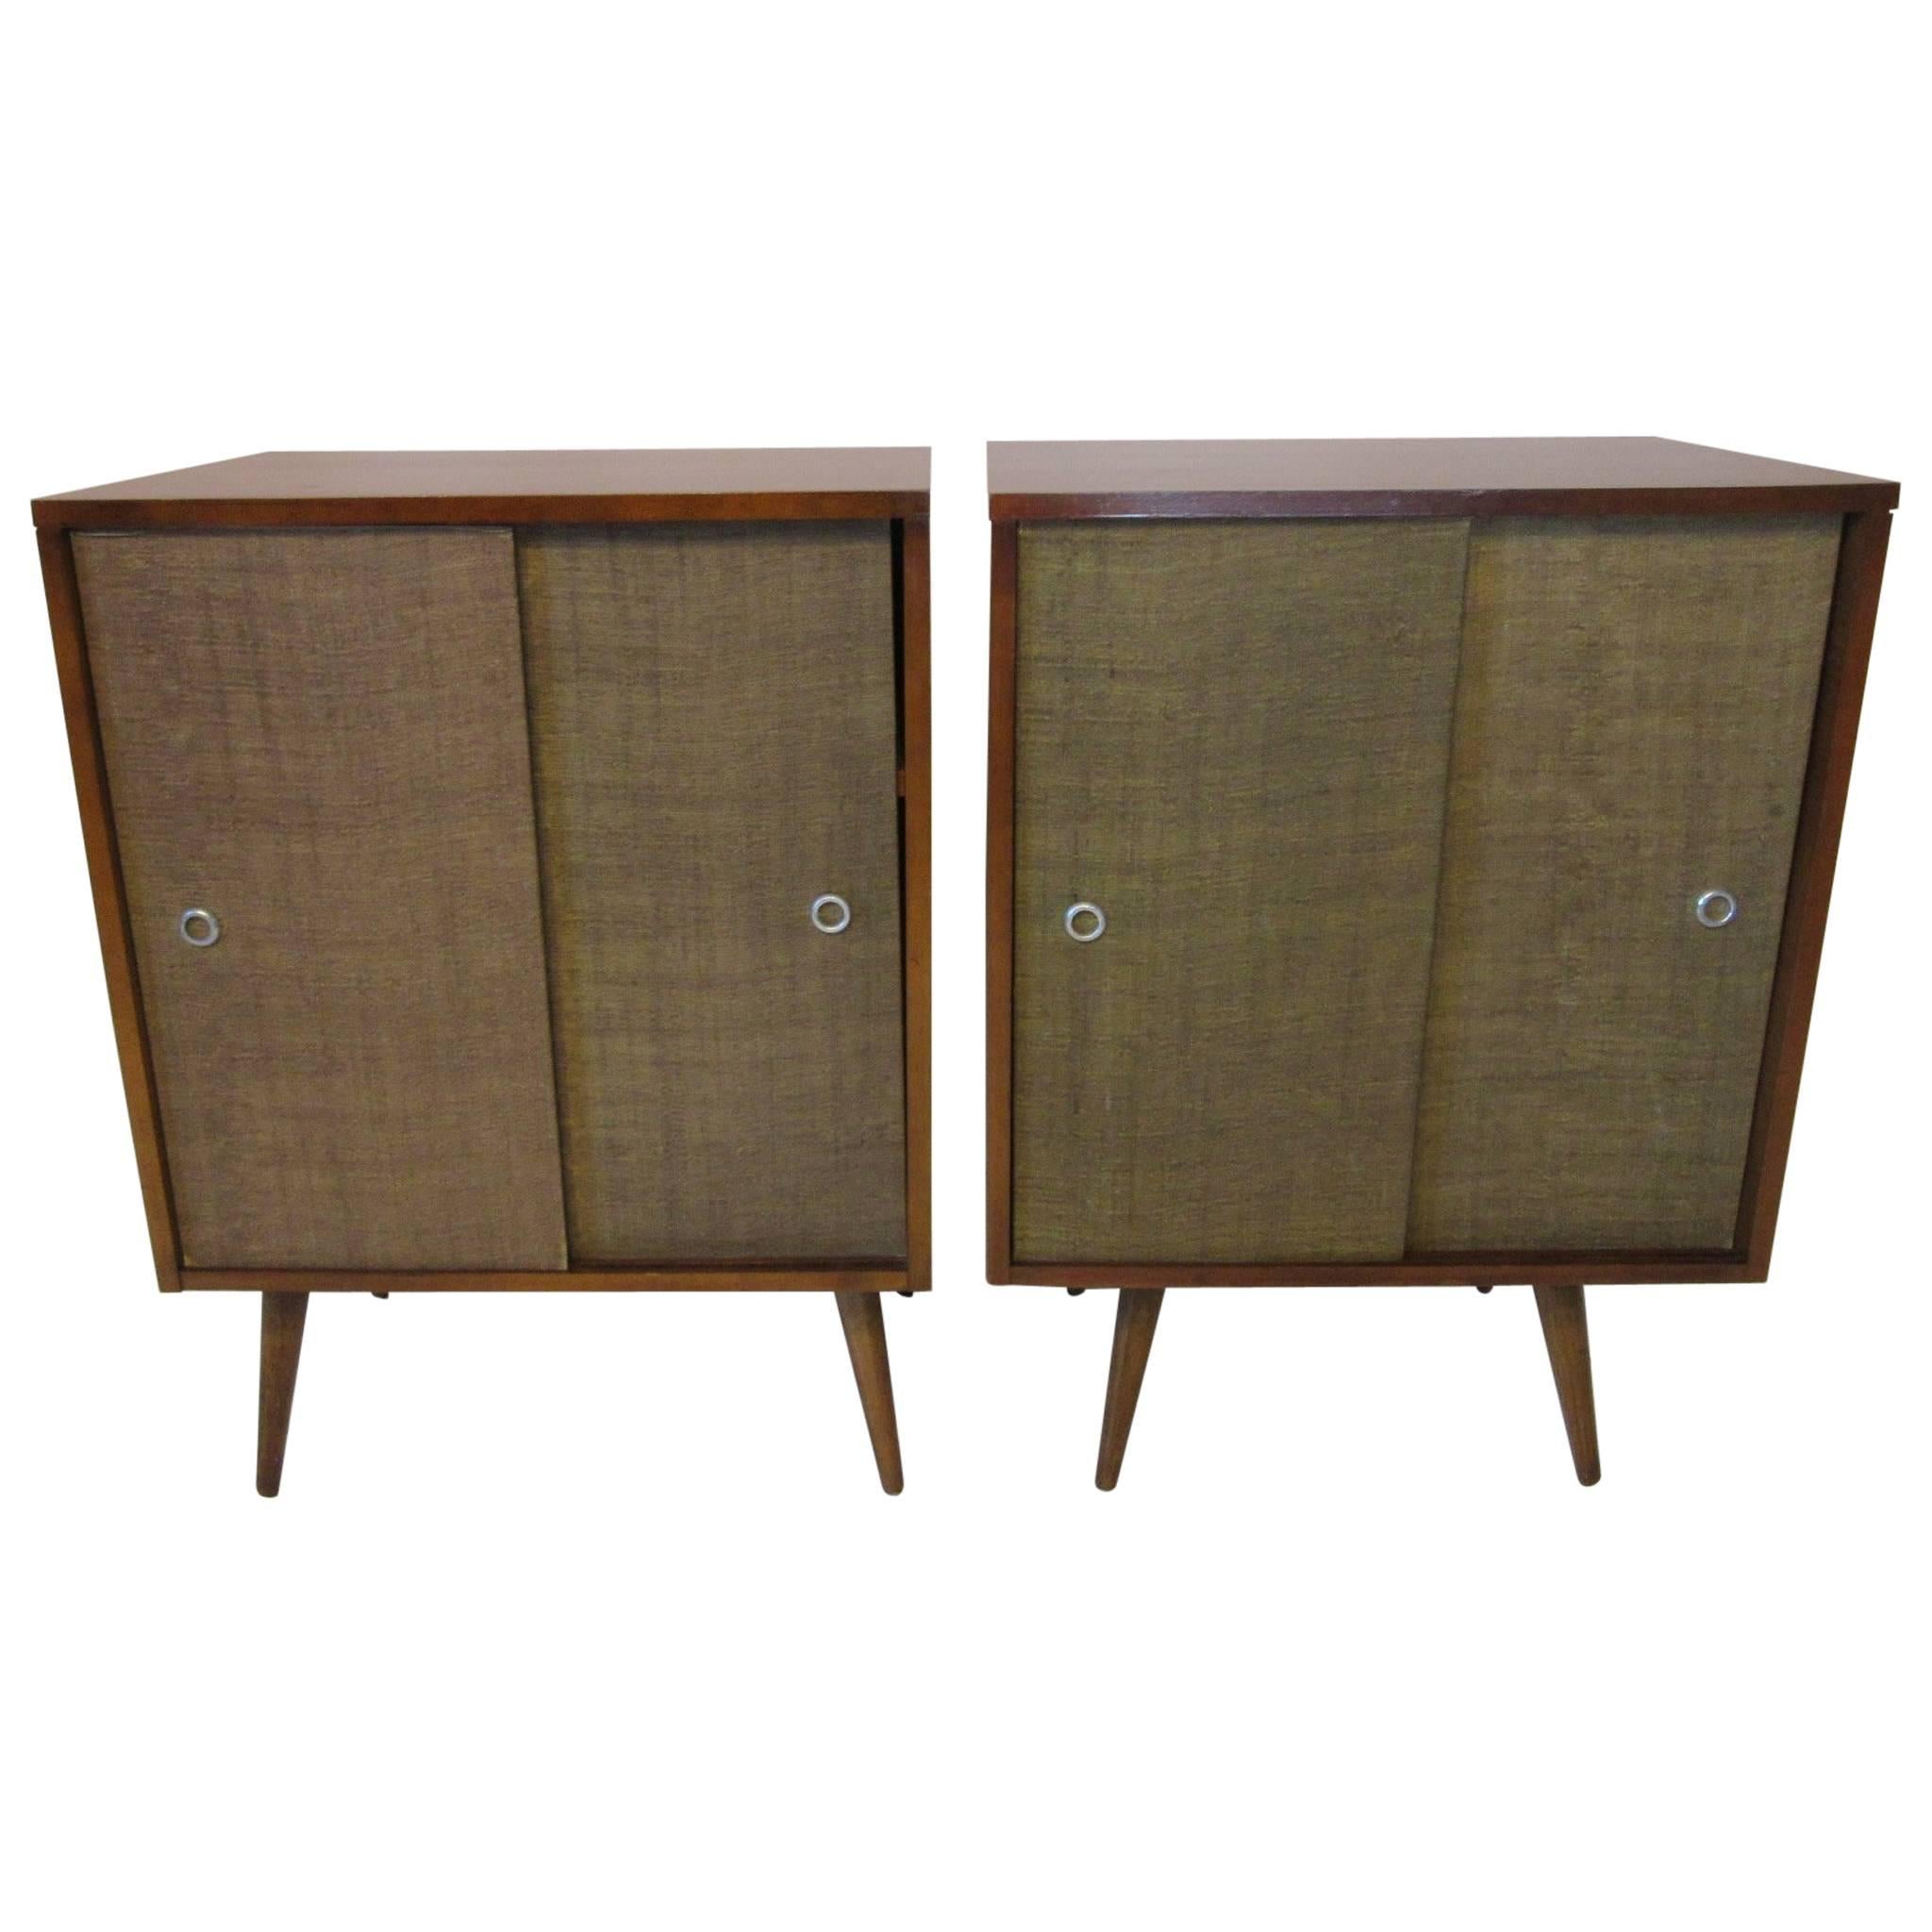 Paul McCobb Small Cabinets from the Planner Group Collection